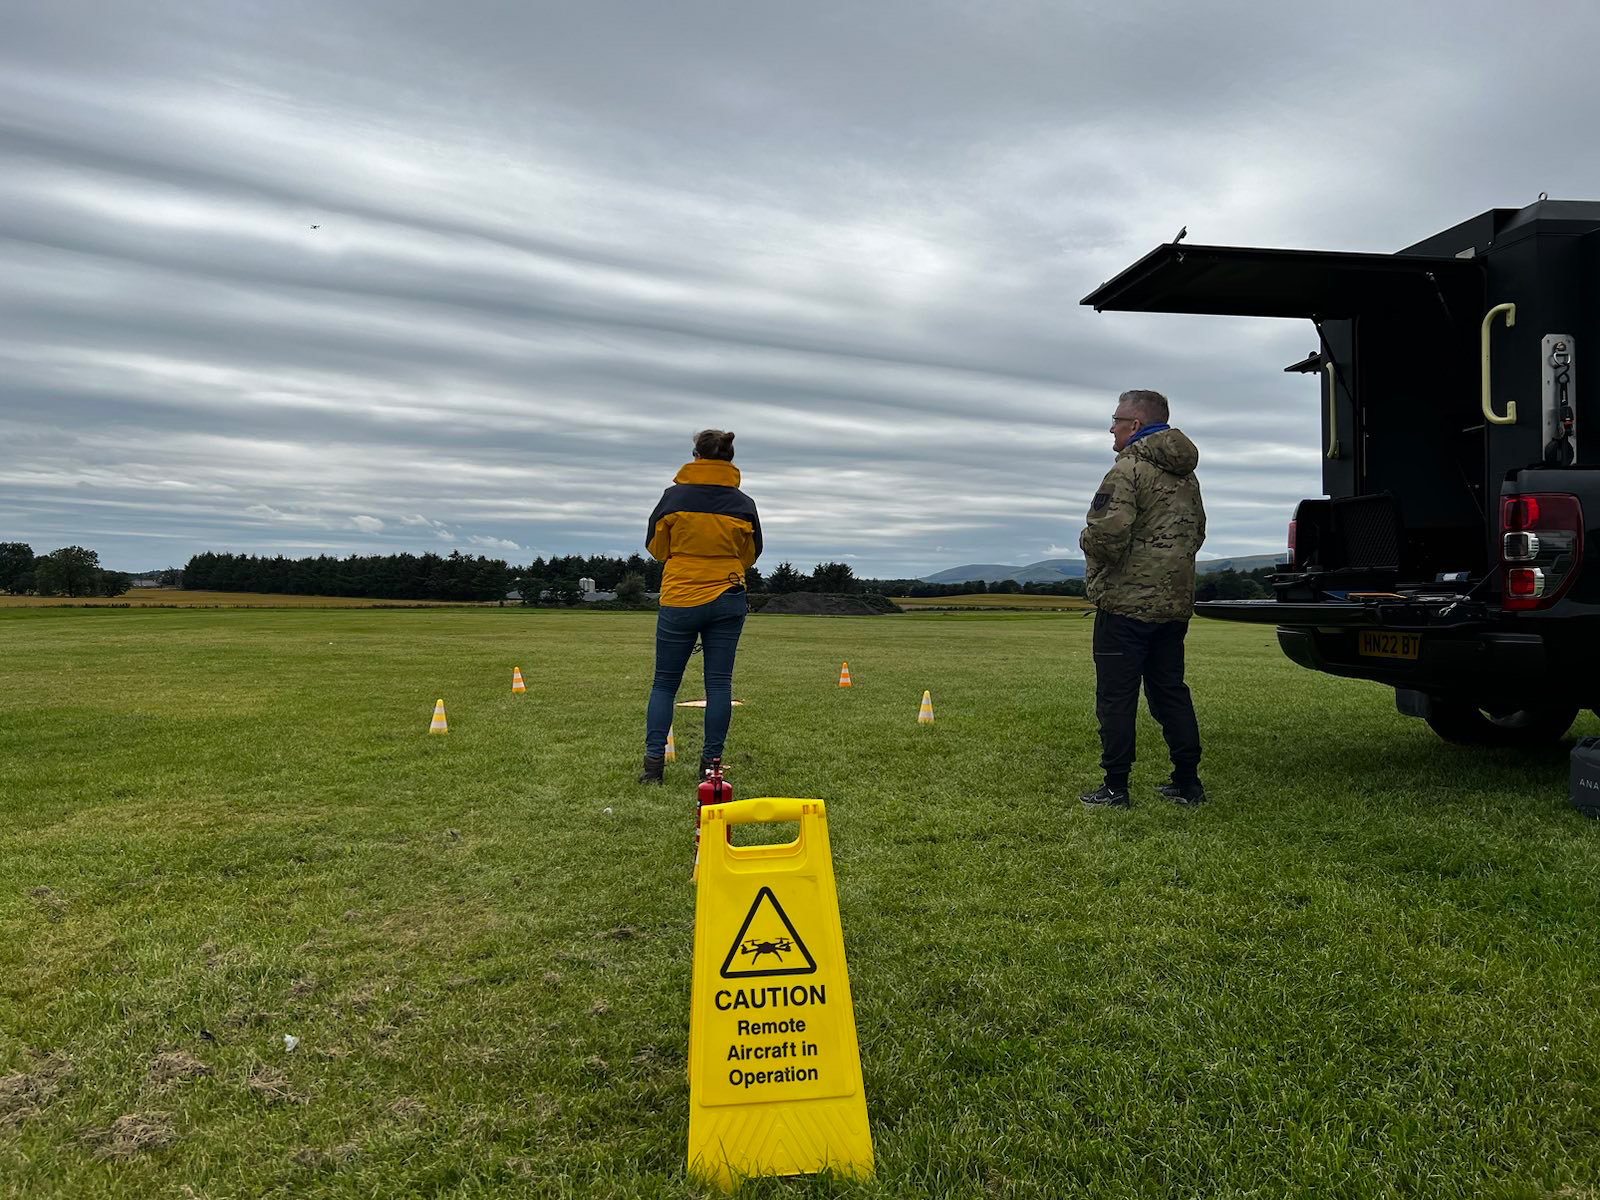 Zeta fast track course. Two people in field operating drone.